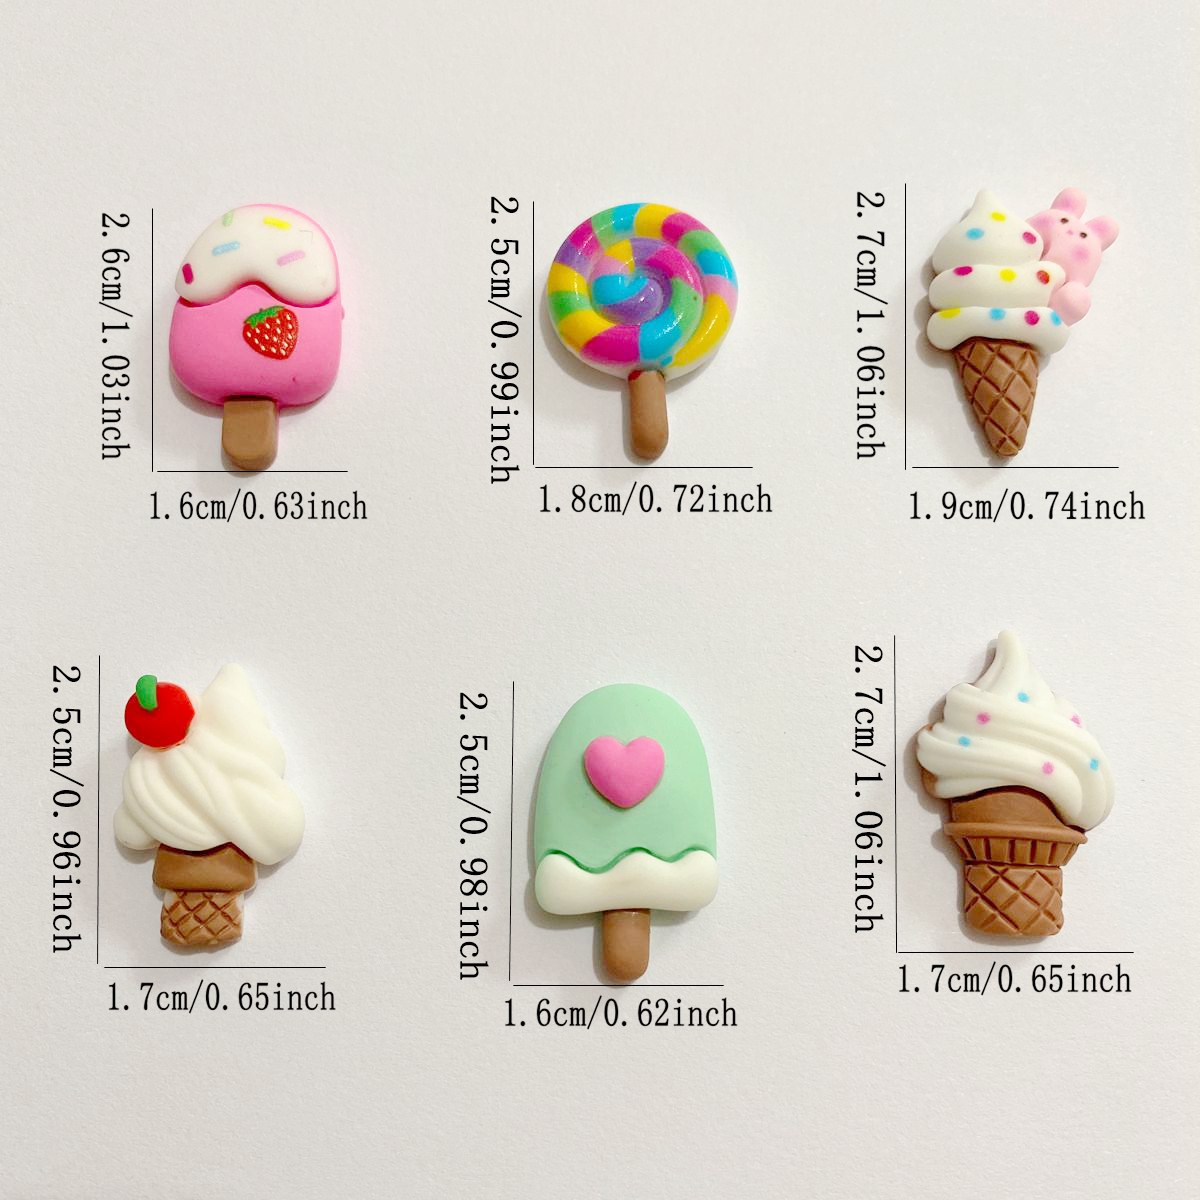 DIY Hokkaido Ice Cream Resin Stickers: Stick On Mobile Phone & Fridge  Decorations For A Fun, Icy Treat Vibe. From Meow_ligths, $0.46